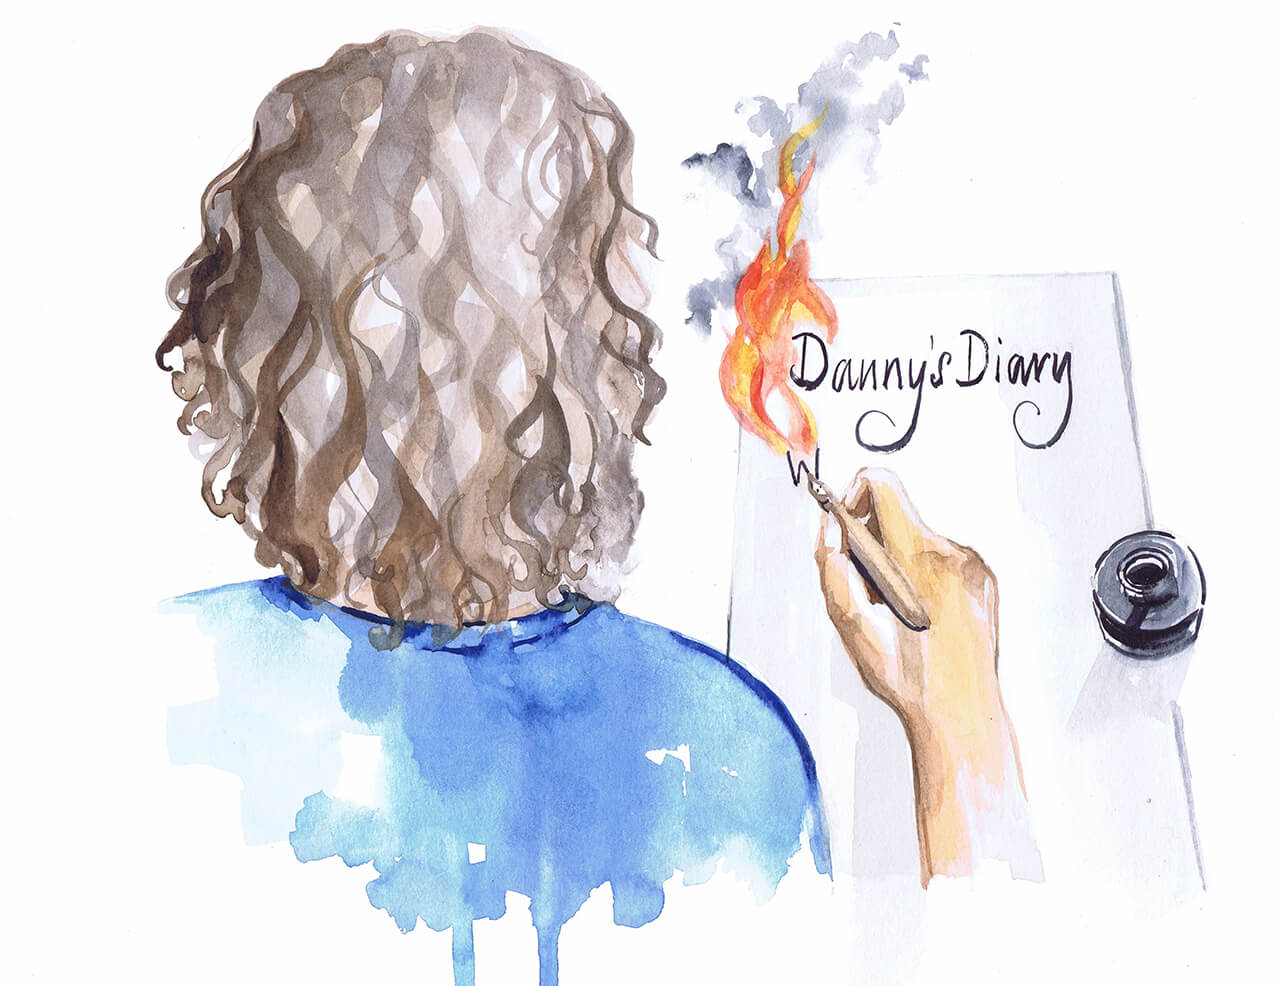 Danny's Diary... Coming soon!